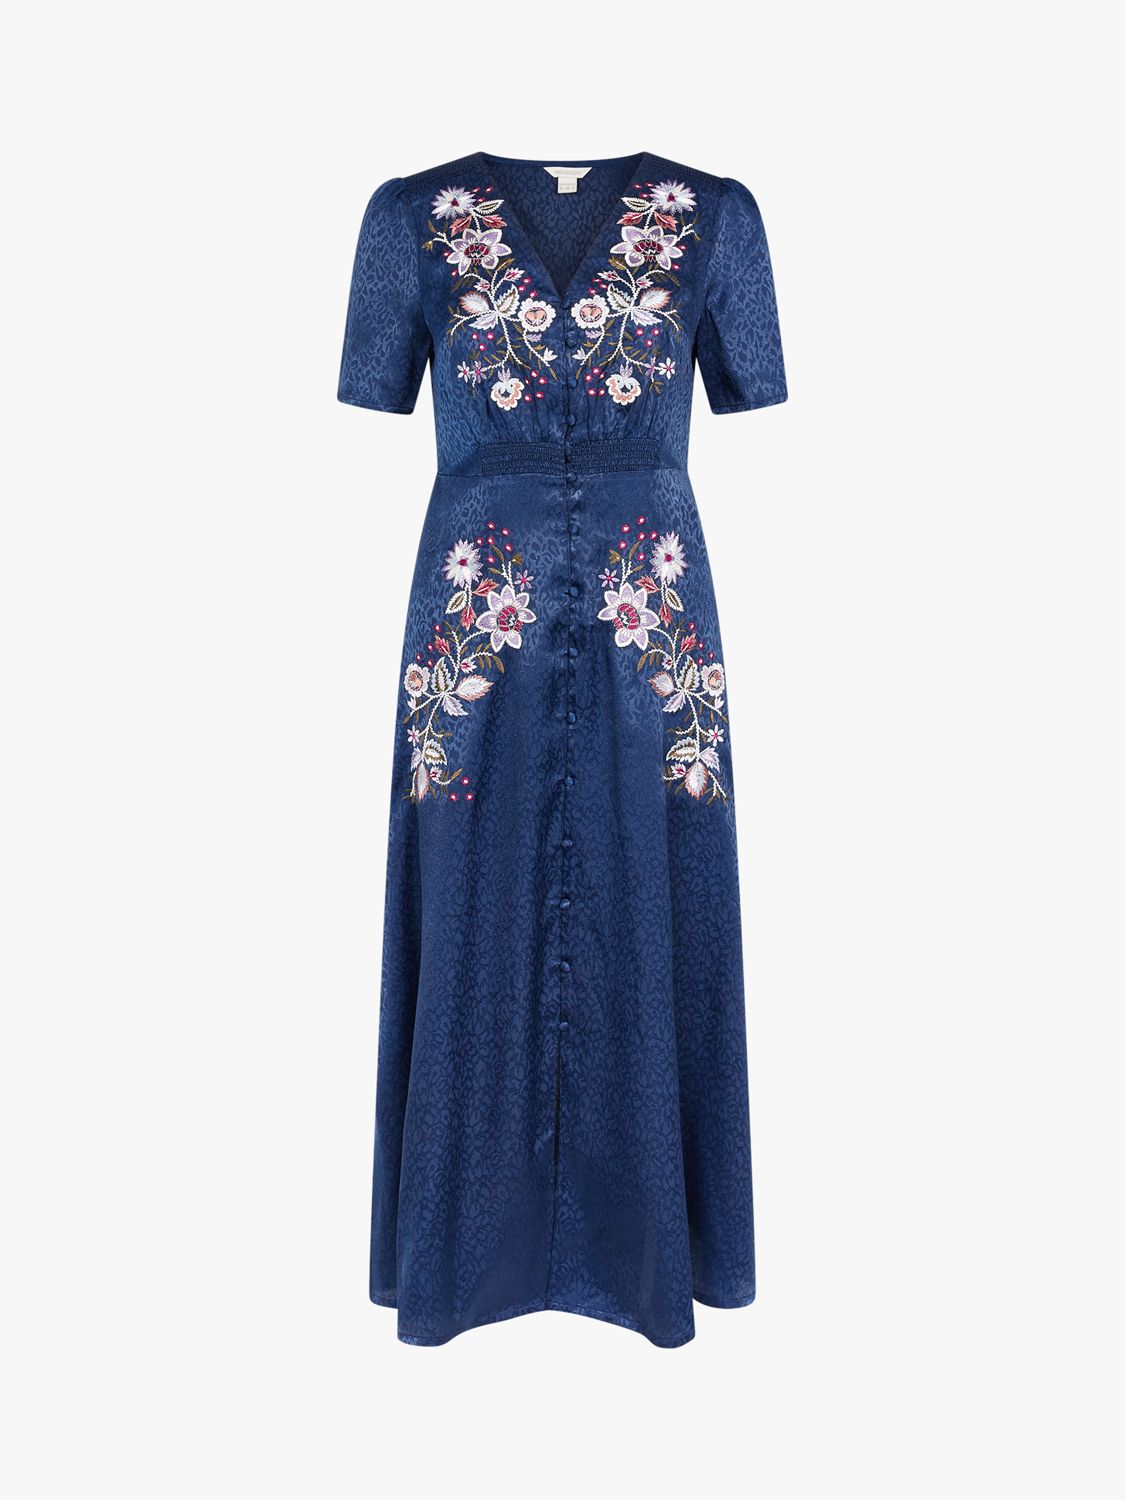 Monsoon Floral Embroidered Jacquard Midi Dress, Navy